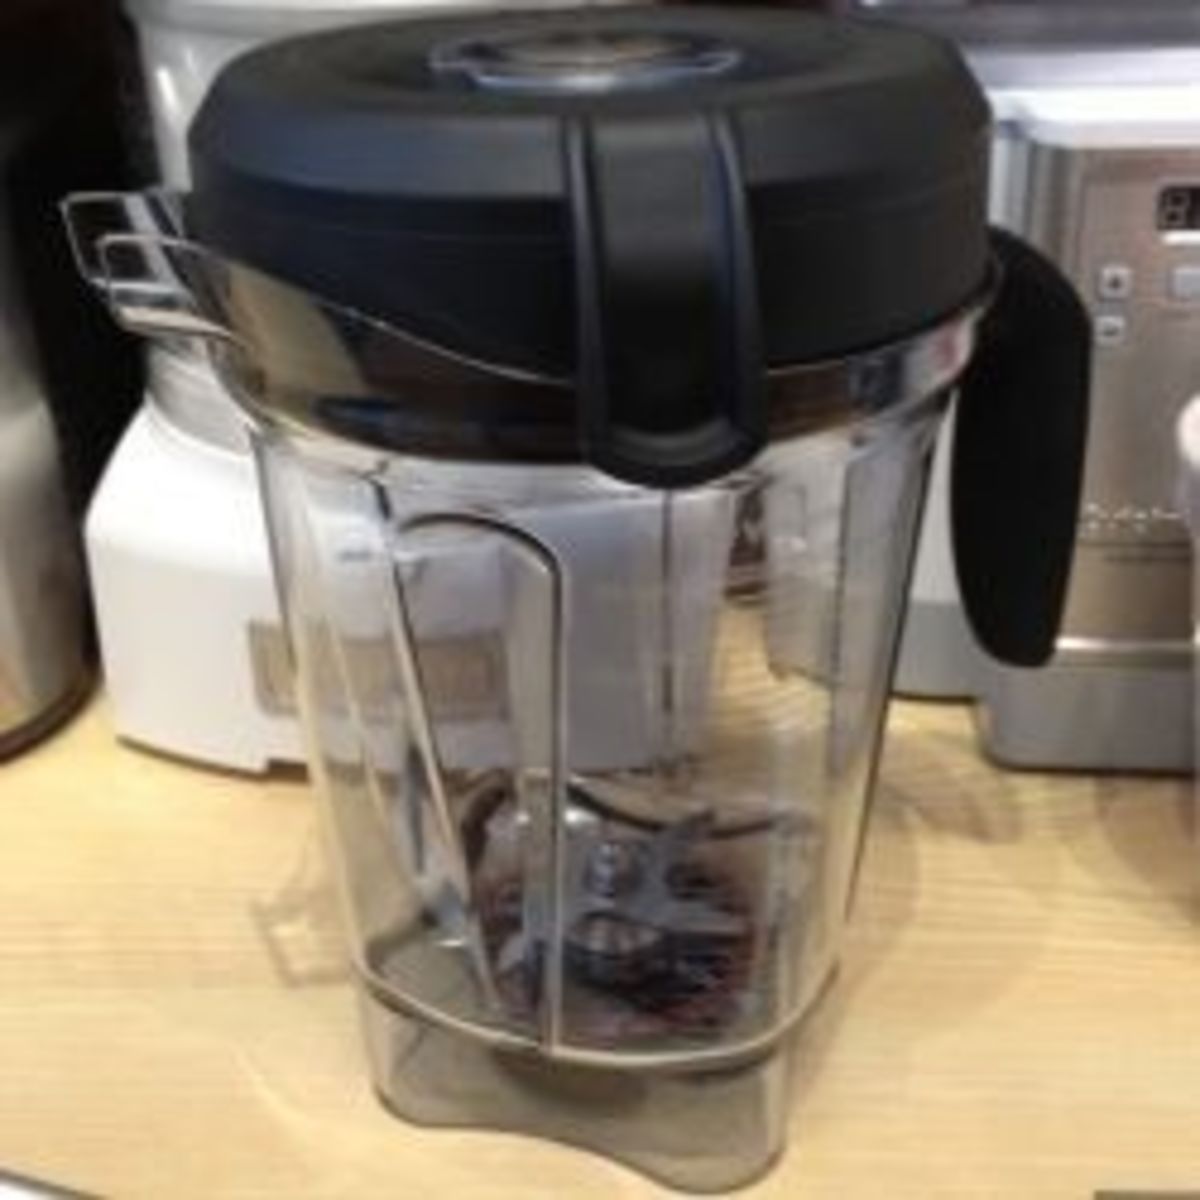 The Vitamix container. (This photo taken by the author on a recent visit to a local retailer.)